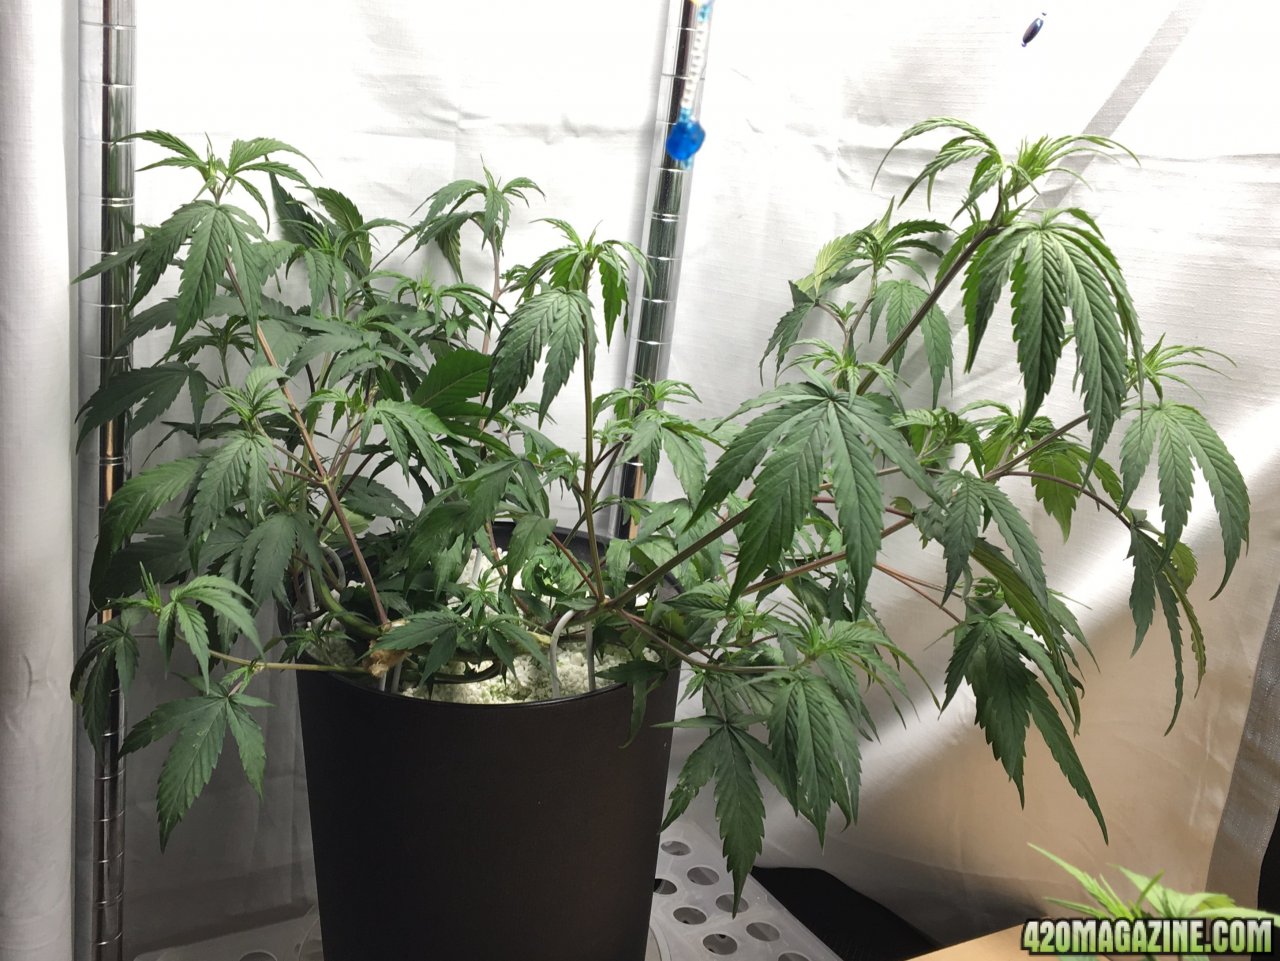 Jamaican 1.4 (Day 29)